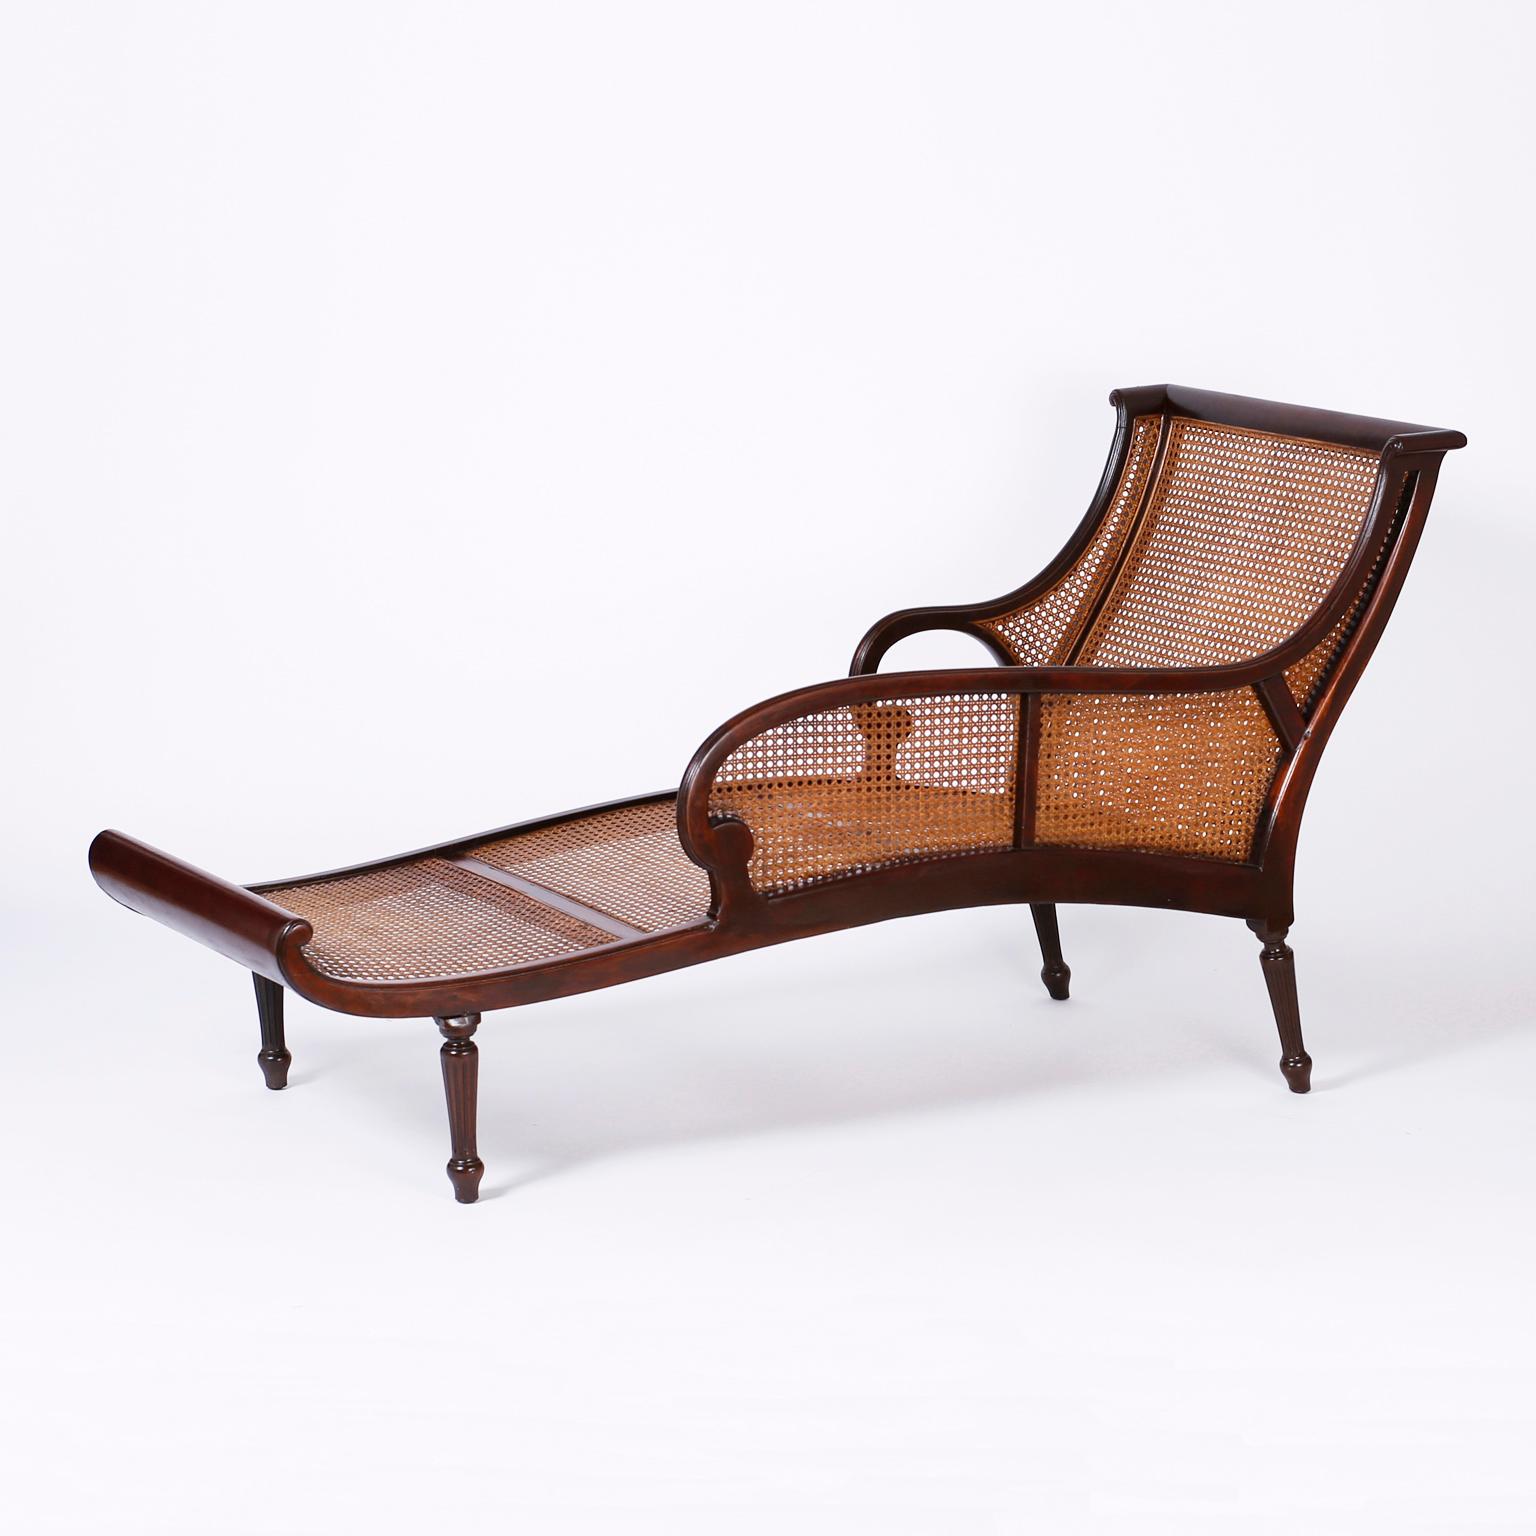 20th Century British Colonial Caned Chaise Lounge or Recamier